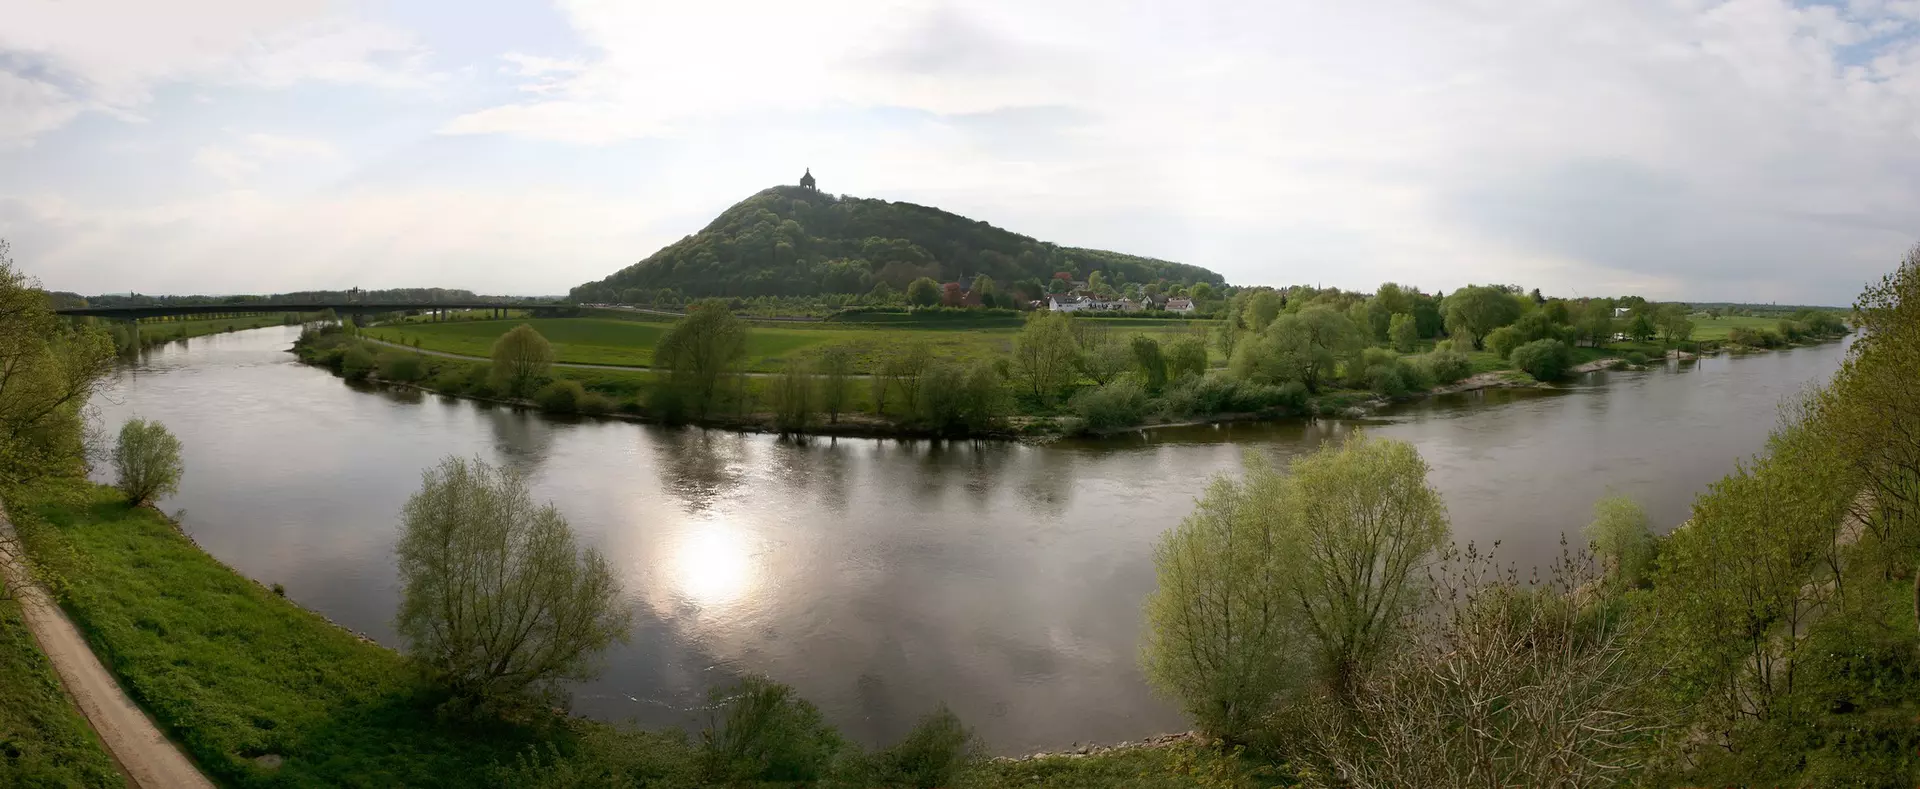 The bend in the Weser with a view of the Emperor William Monument